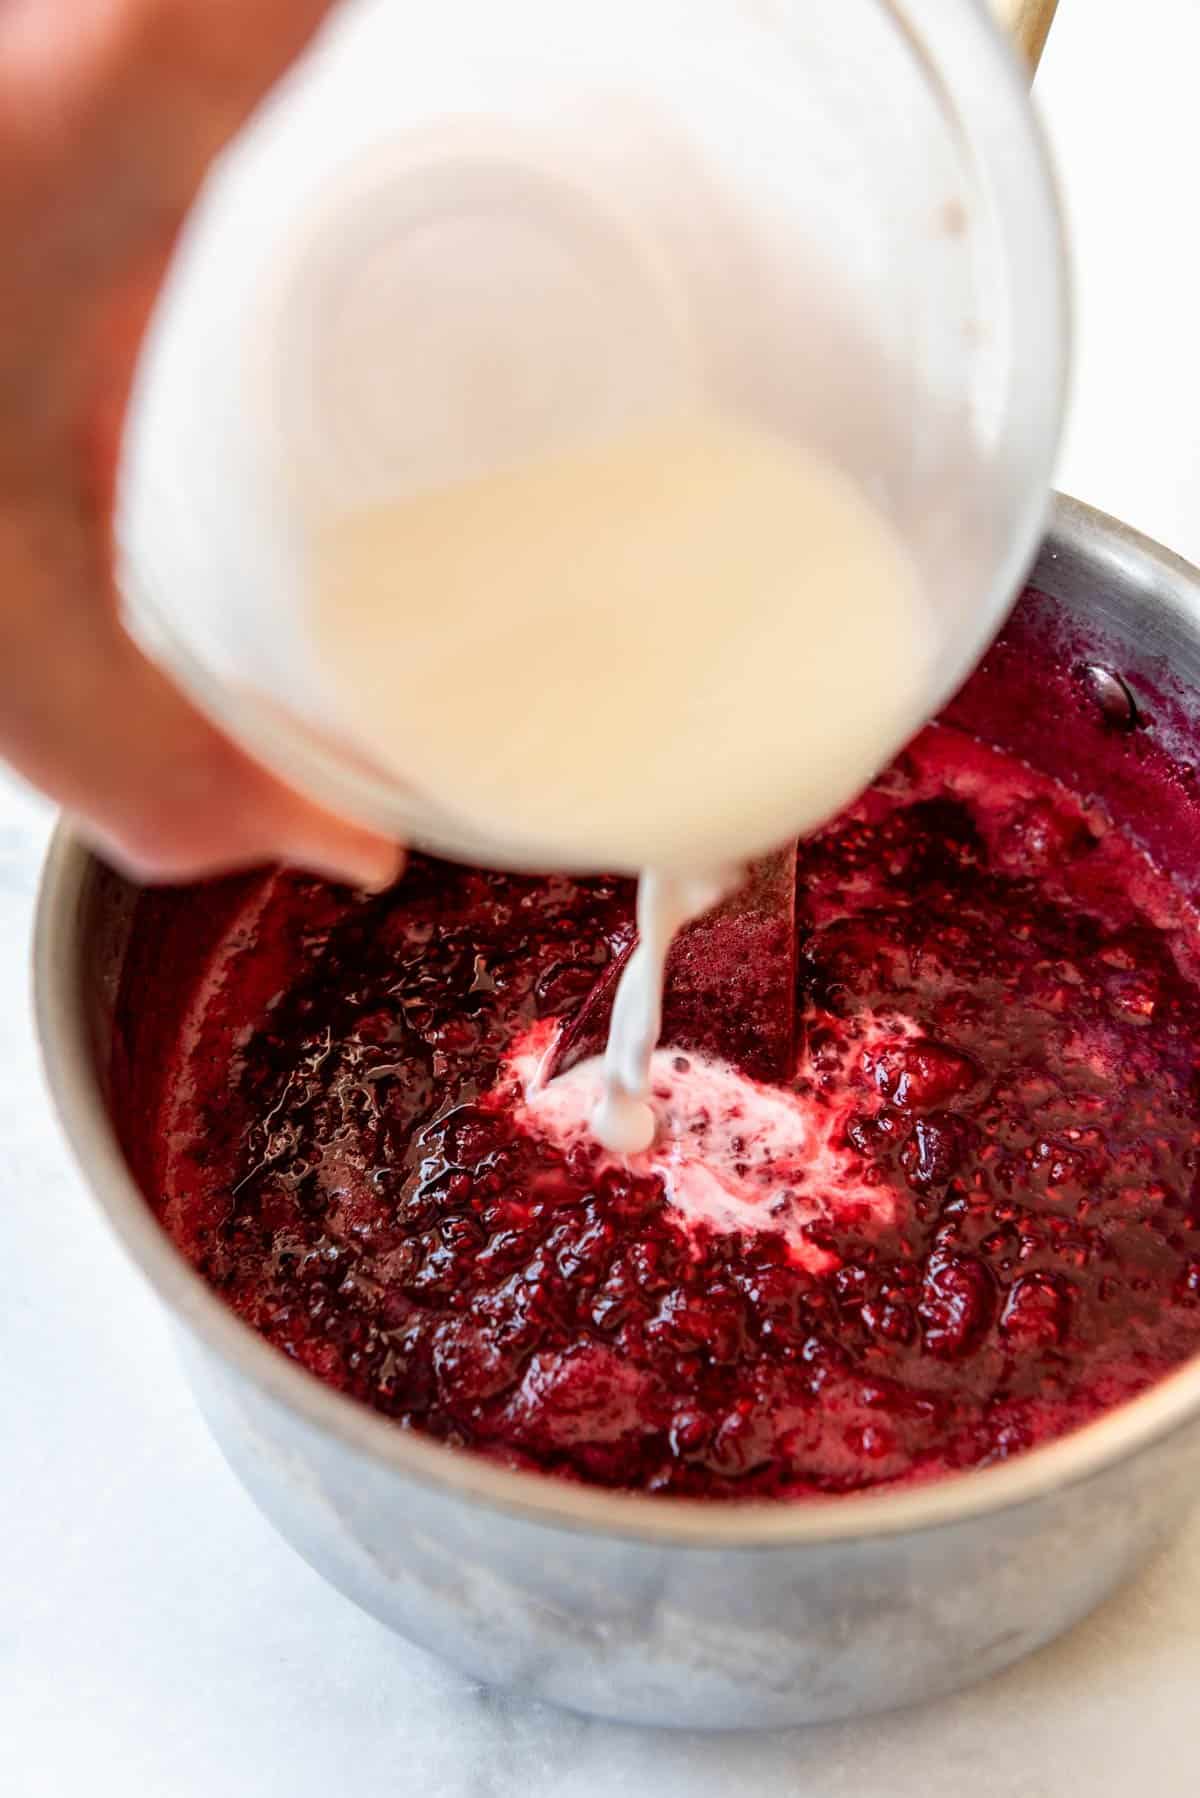 Adding a cornstarch slurry to cooked raspberries and sugar.